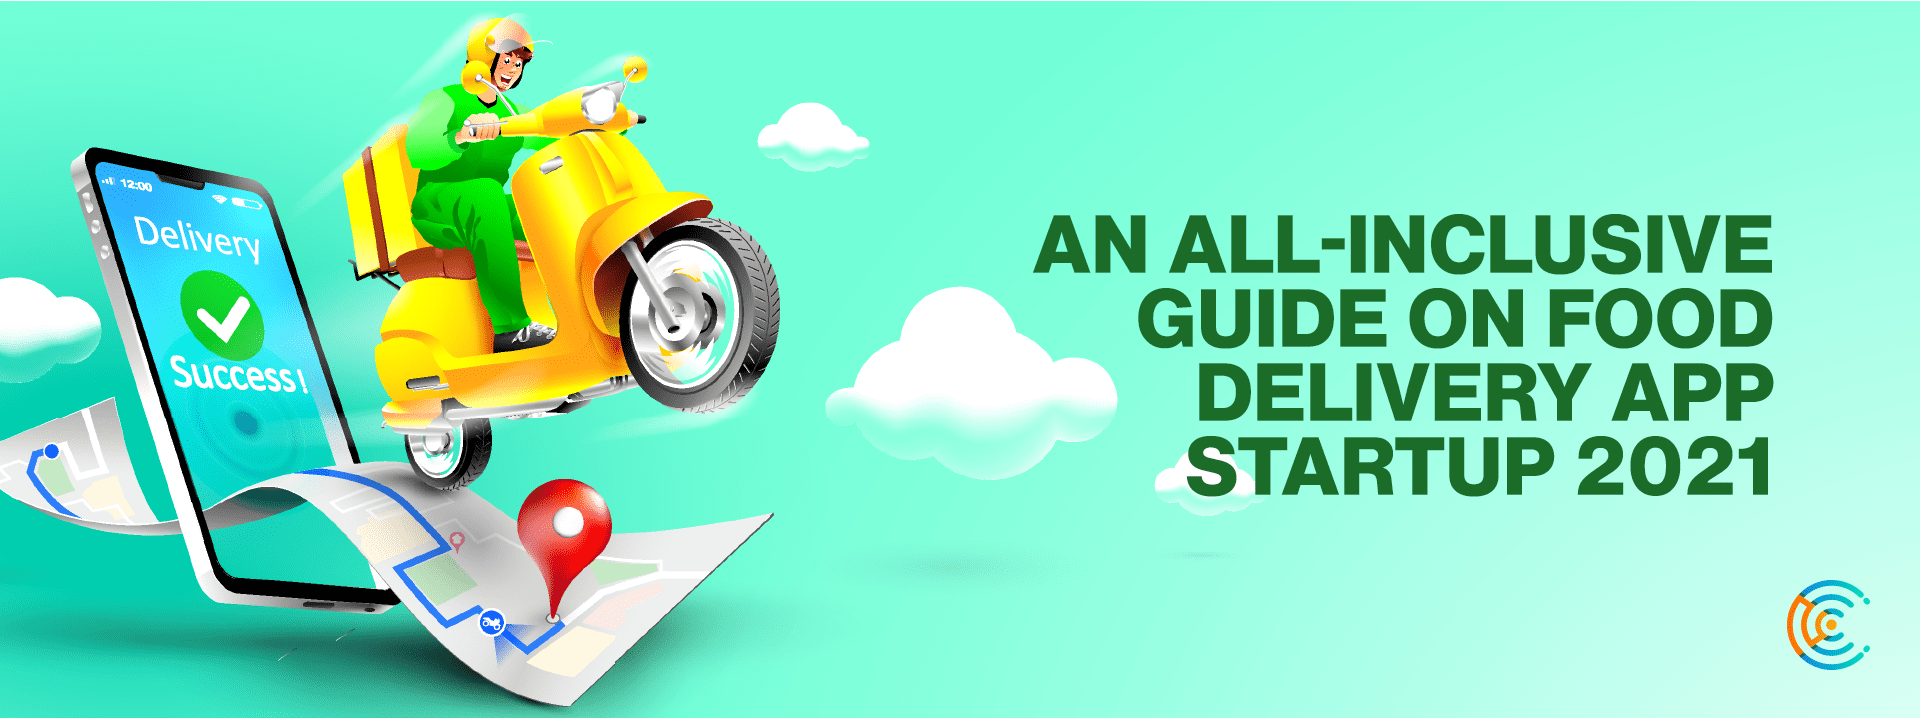 Guide on Food Delivery App Startup 2021